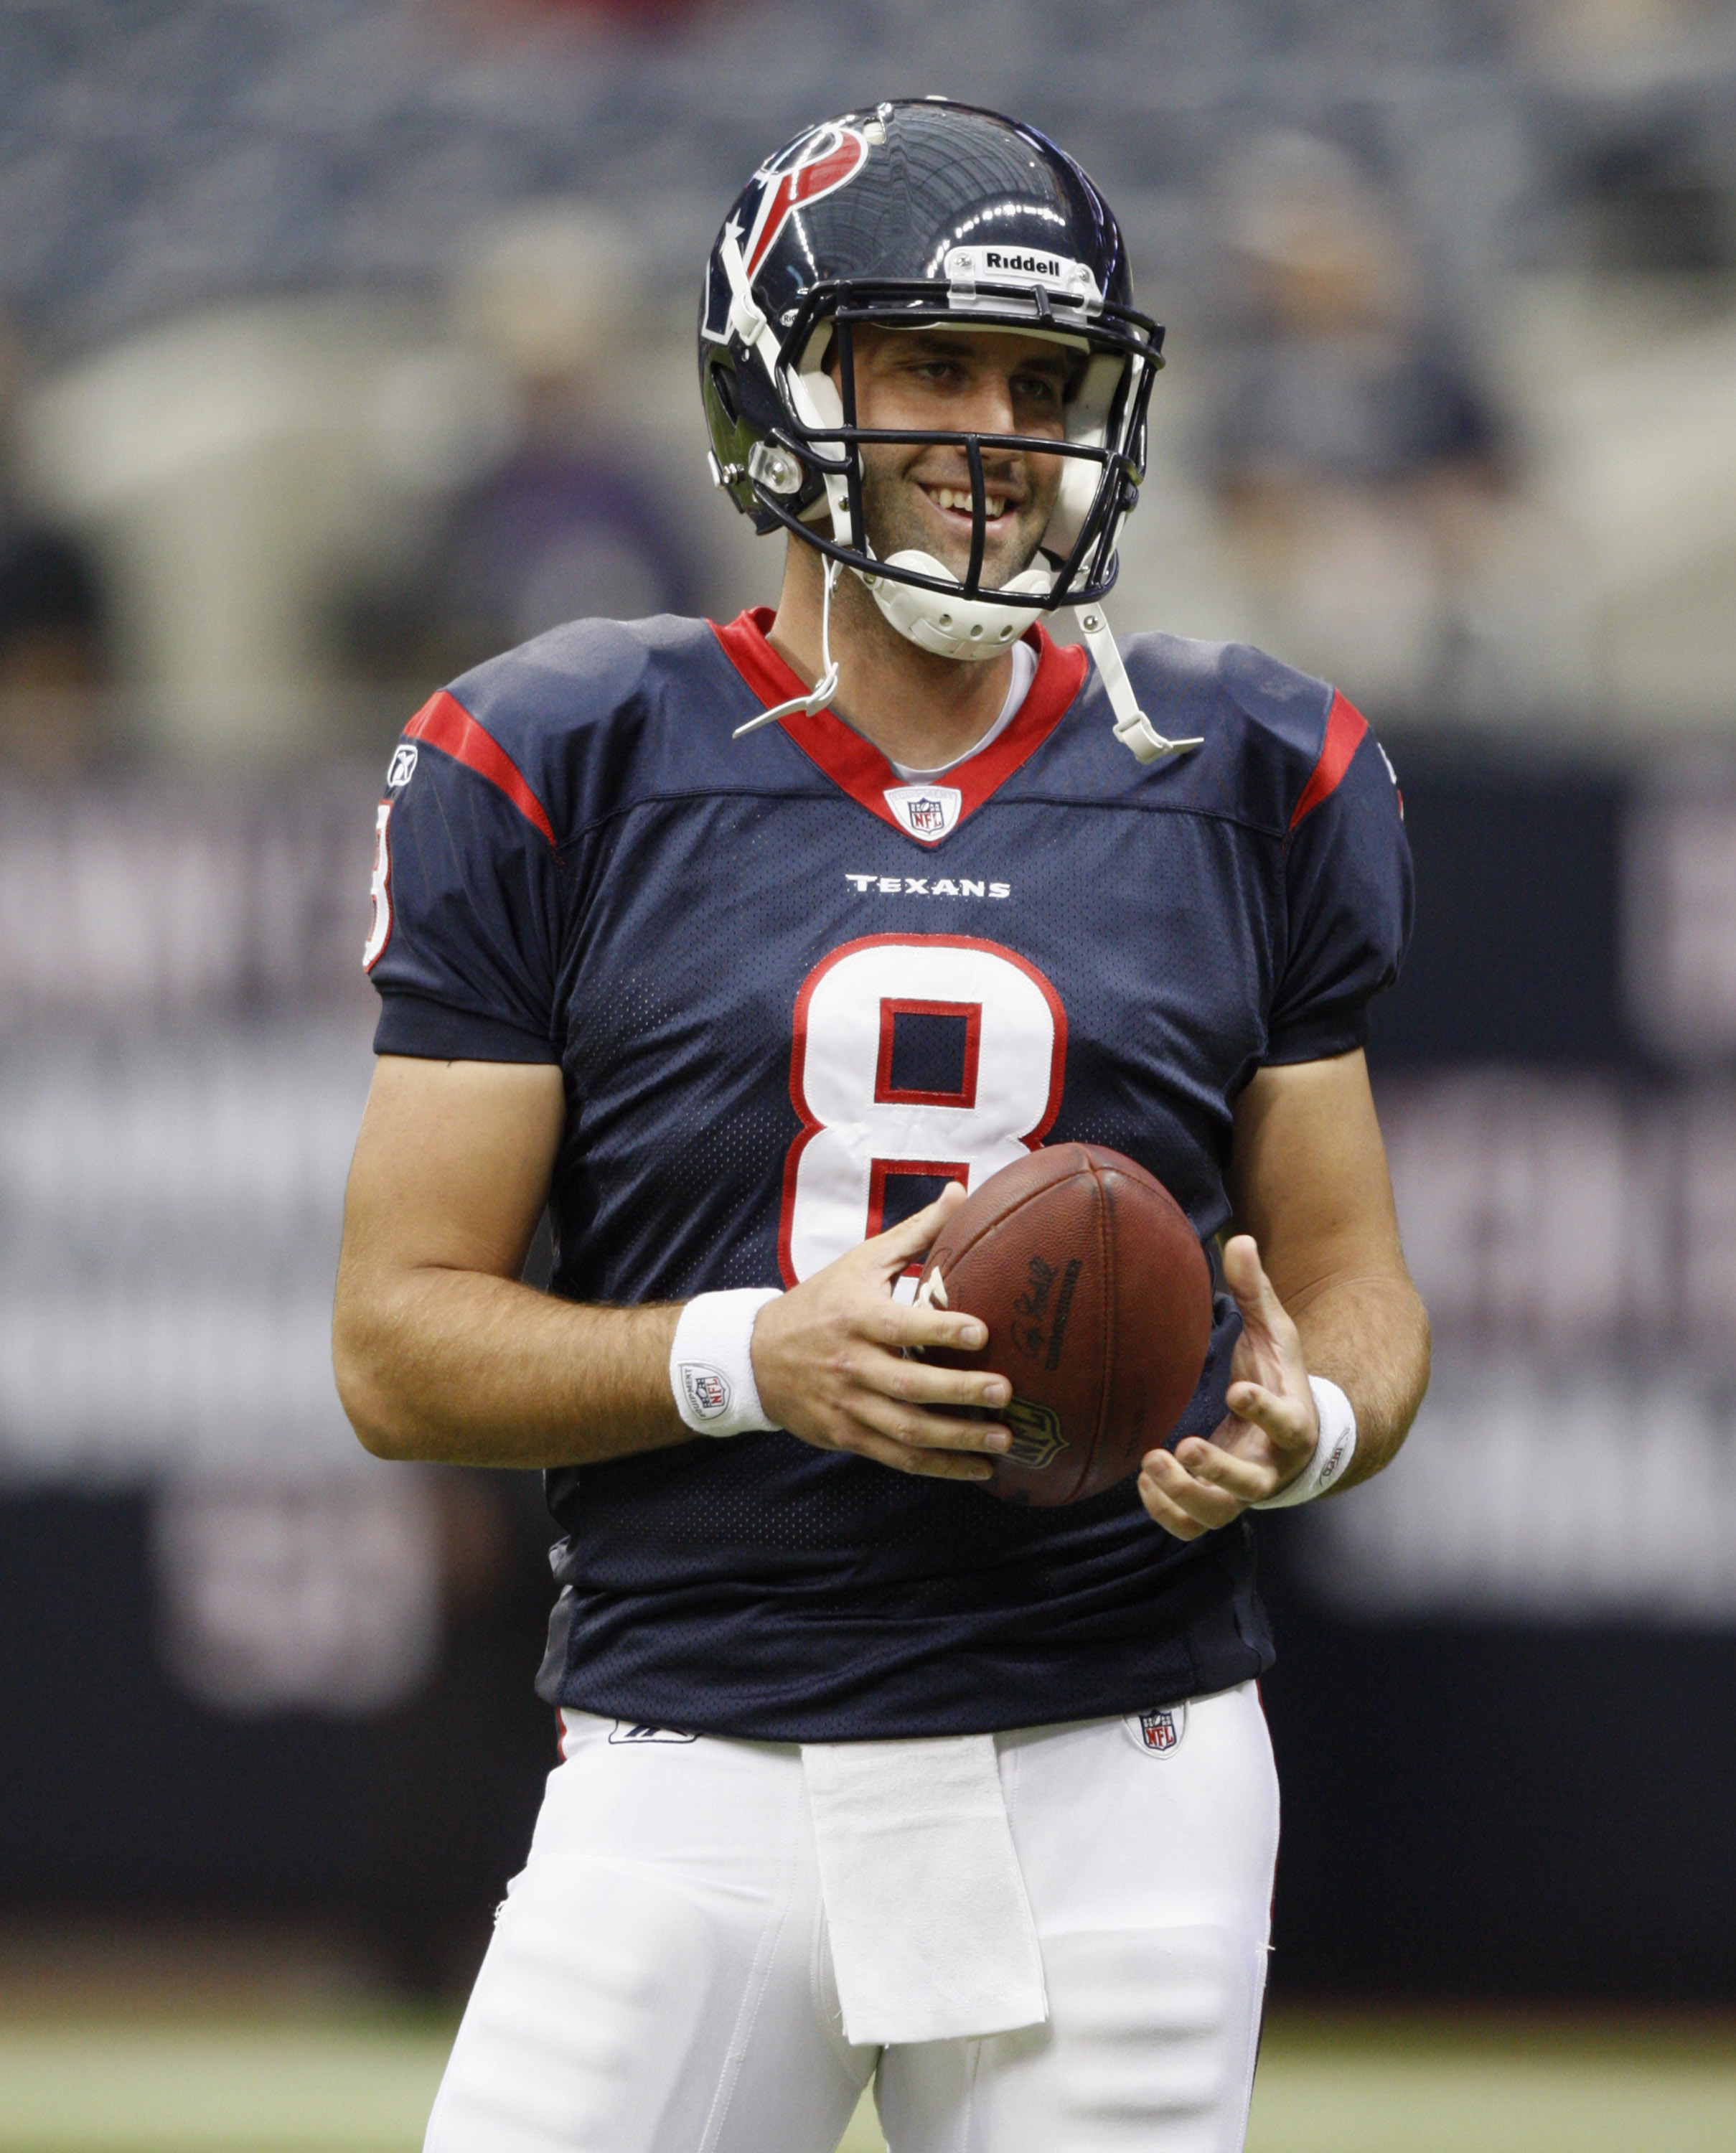 HOUSTON - SEPTEMBER 02:  Quarterback Matt Schaub #8 of the Houston Texans warms up before a preseason game against the Tampa Bay Buccaneers at Reliant Stadium on September 2, 2010 in Houston, Texas.  (Photo by Bob Levey/Getty Images)